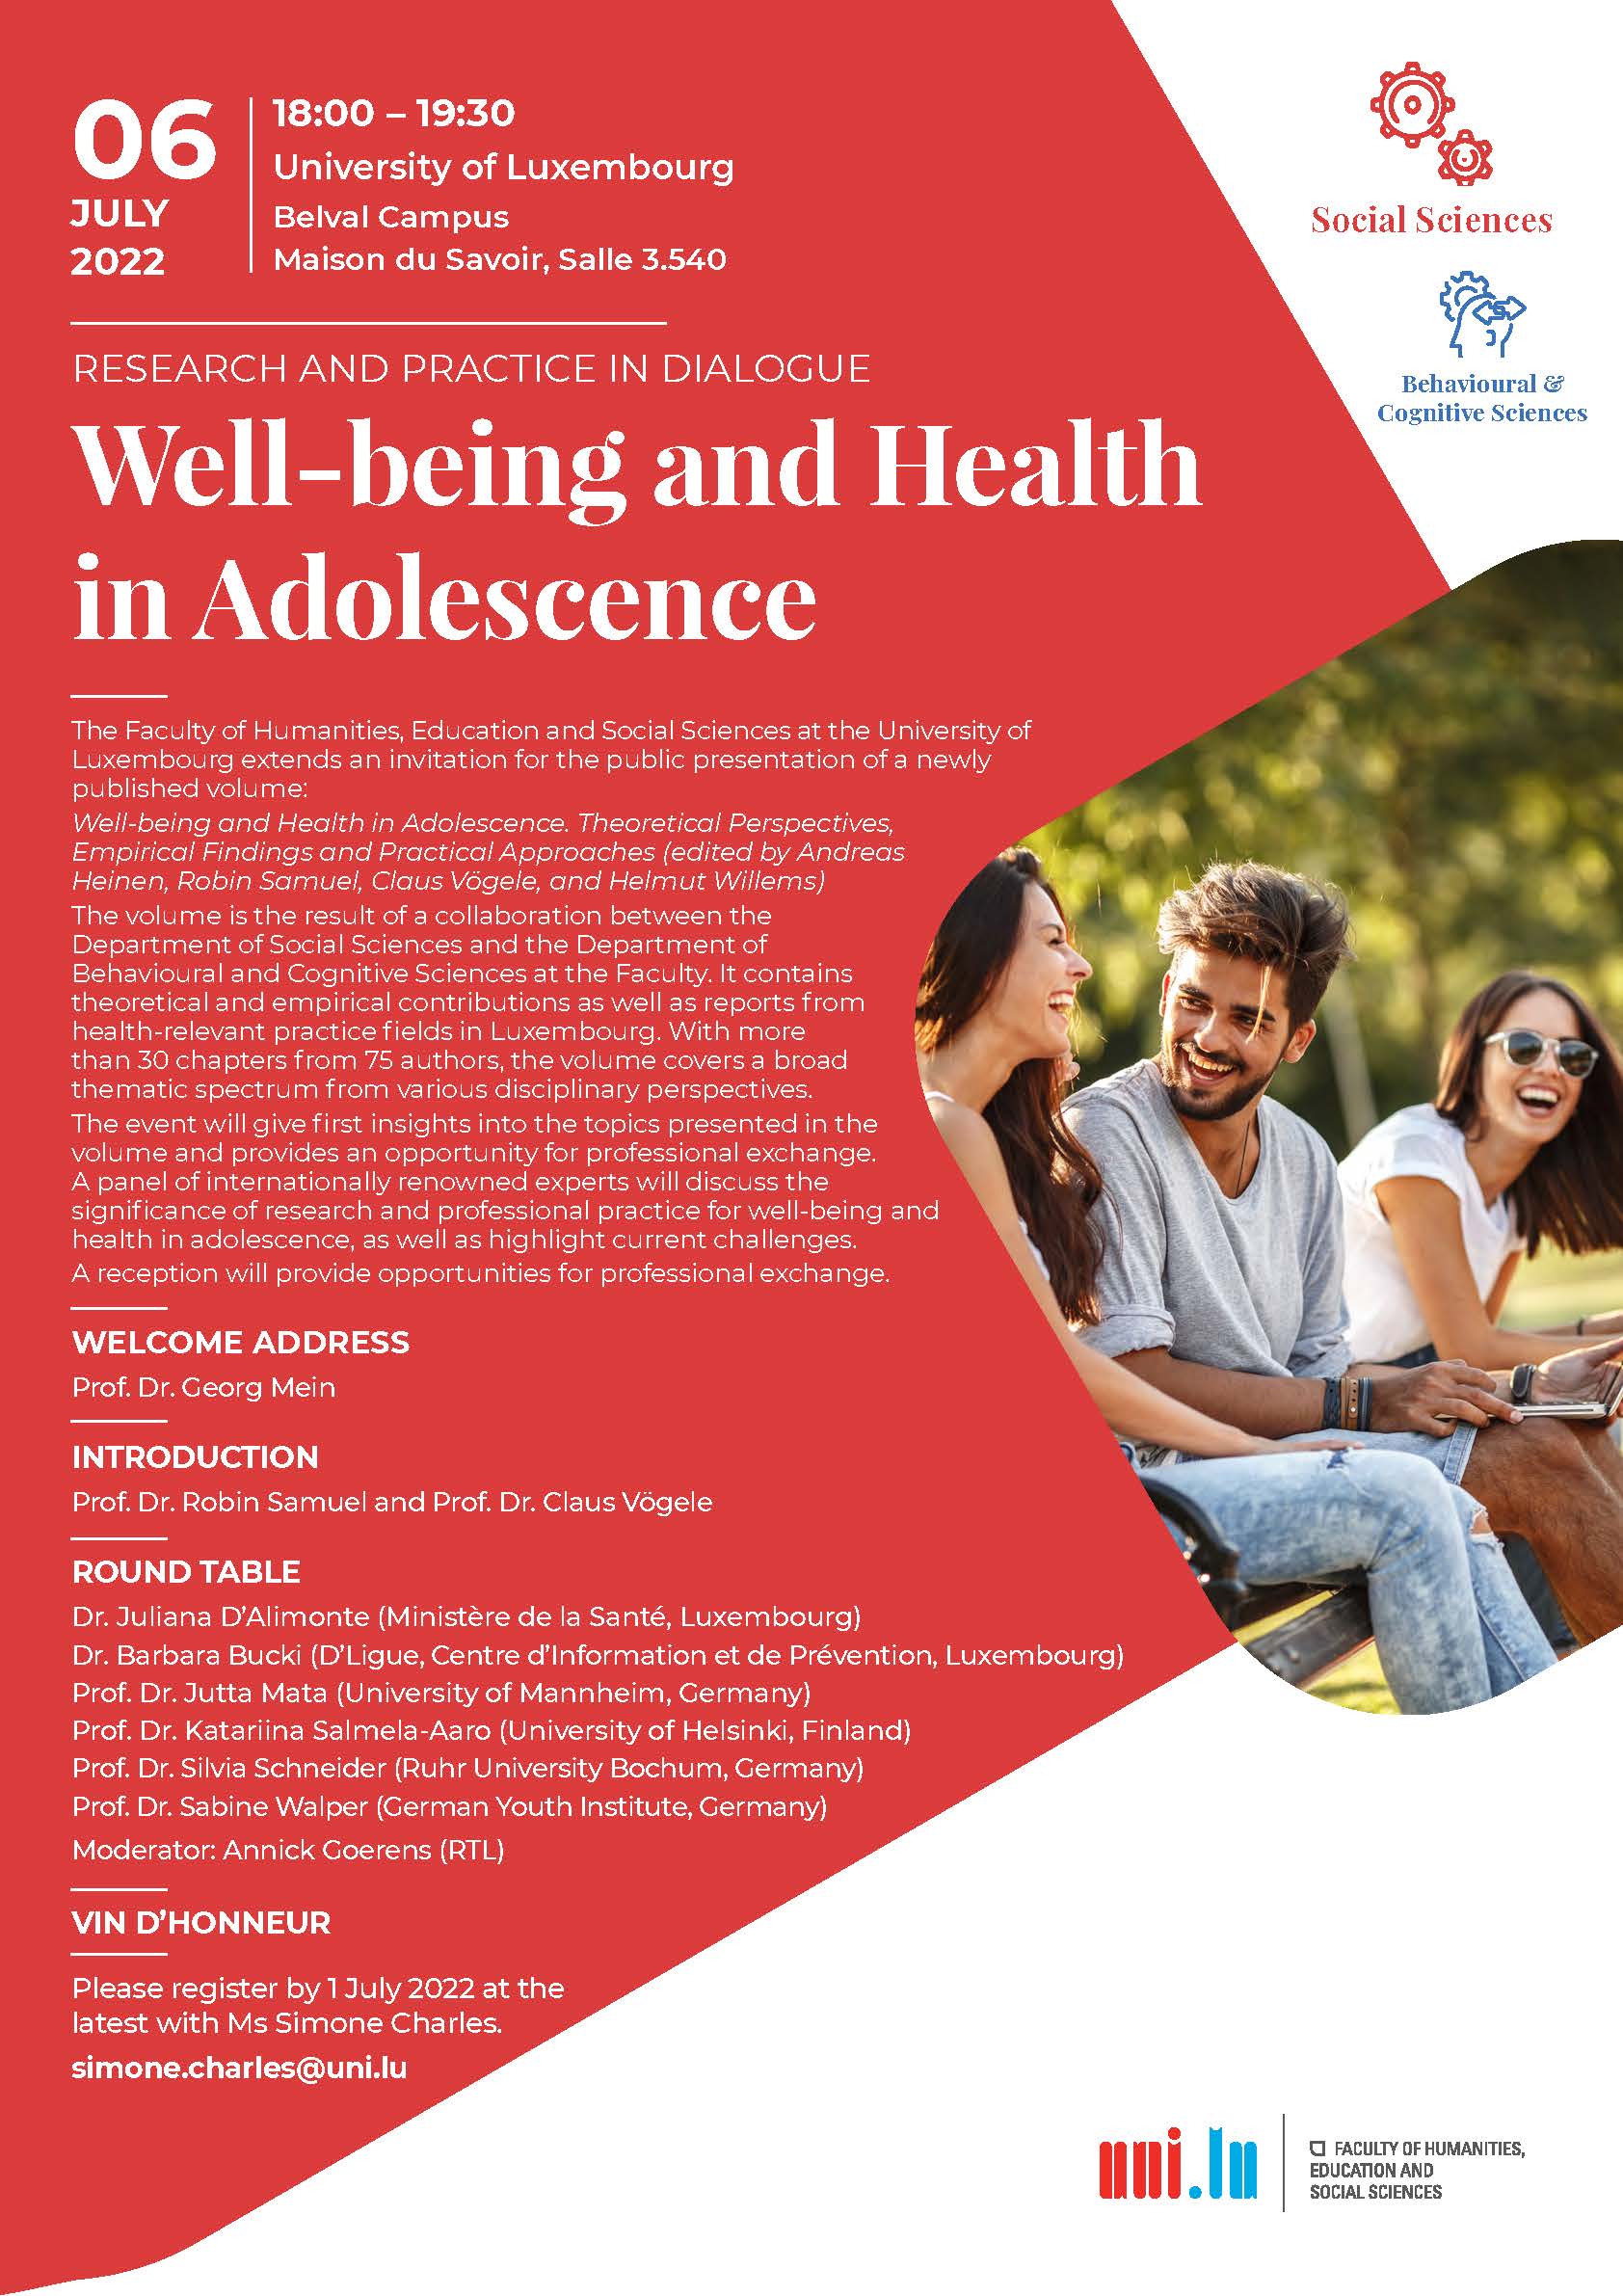 Buchpremiere - Well-being and Health in Adolescence